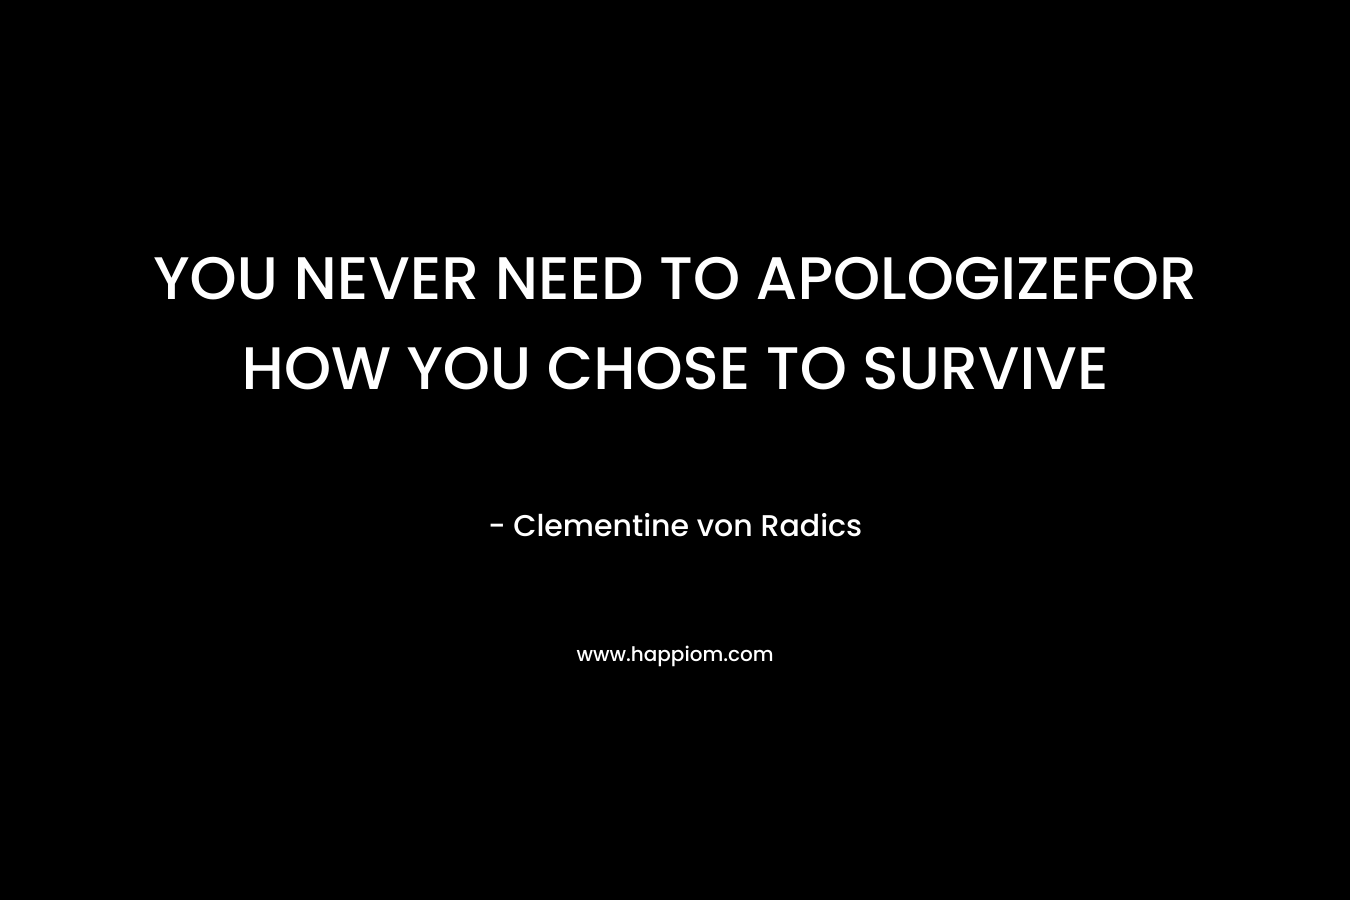 YOU NEVER NEED TO APOLOGIZEFOR HOW YOU CHOSE TO SURVIVE